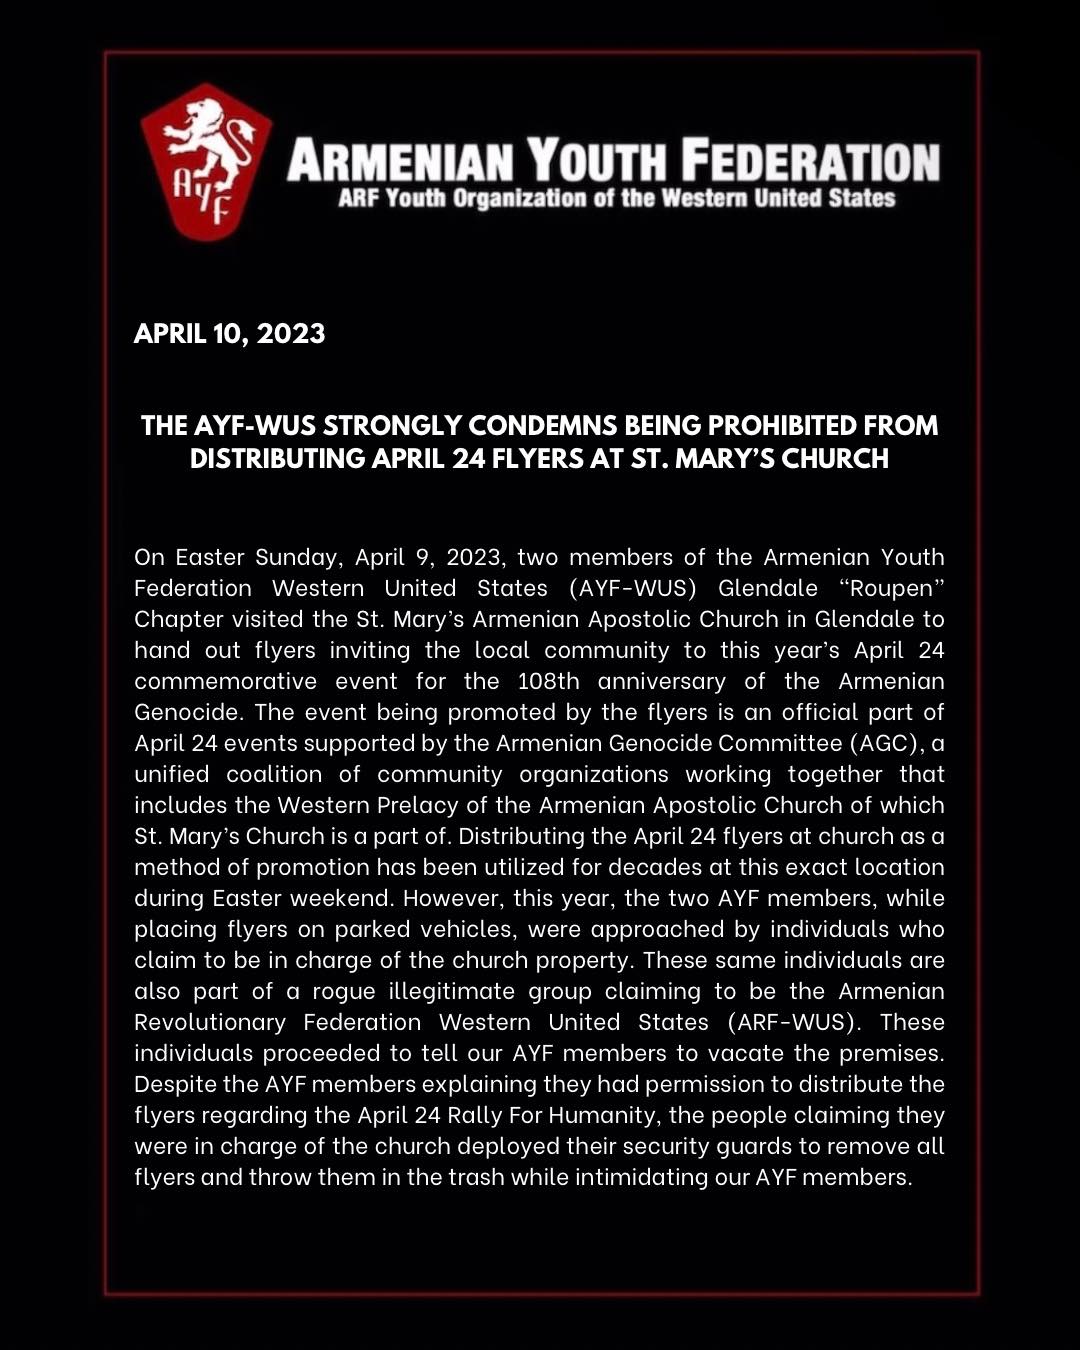 Fake “ARF” Syndicate Disrupts AYF from Passing April 24 Flyers on Easter Sunday